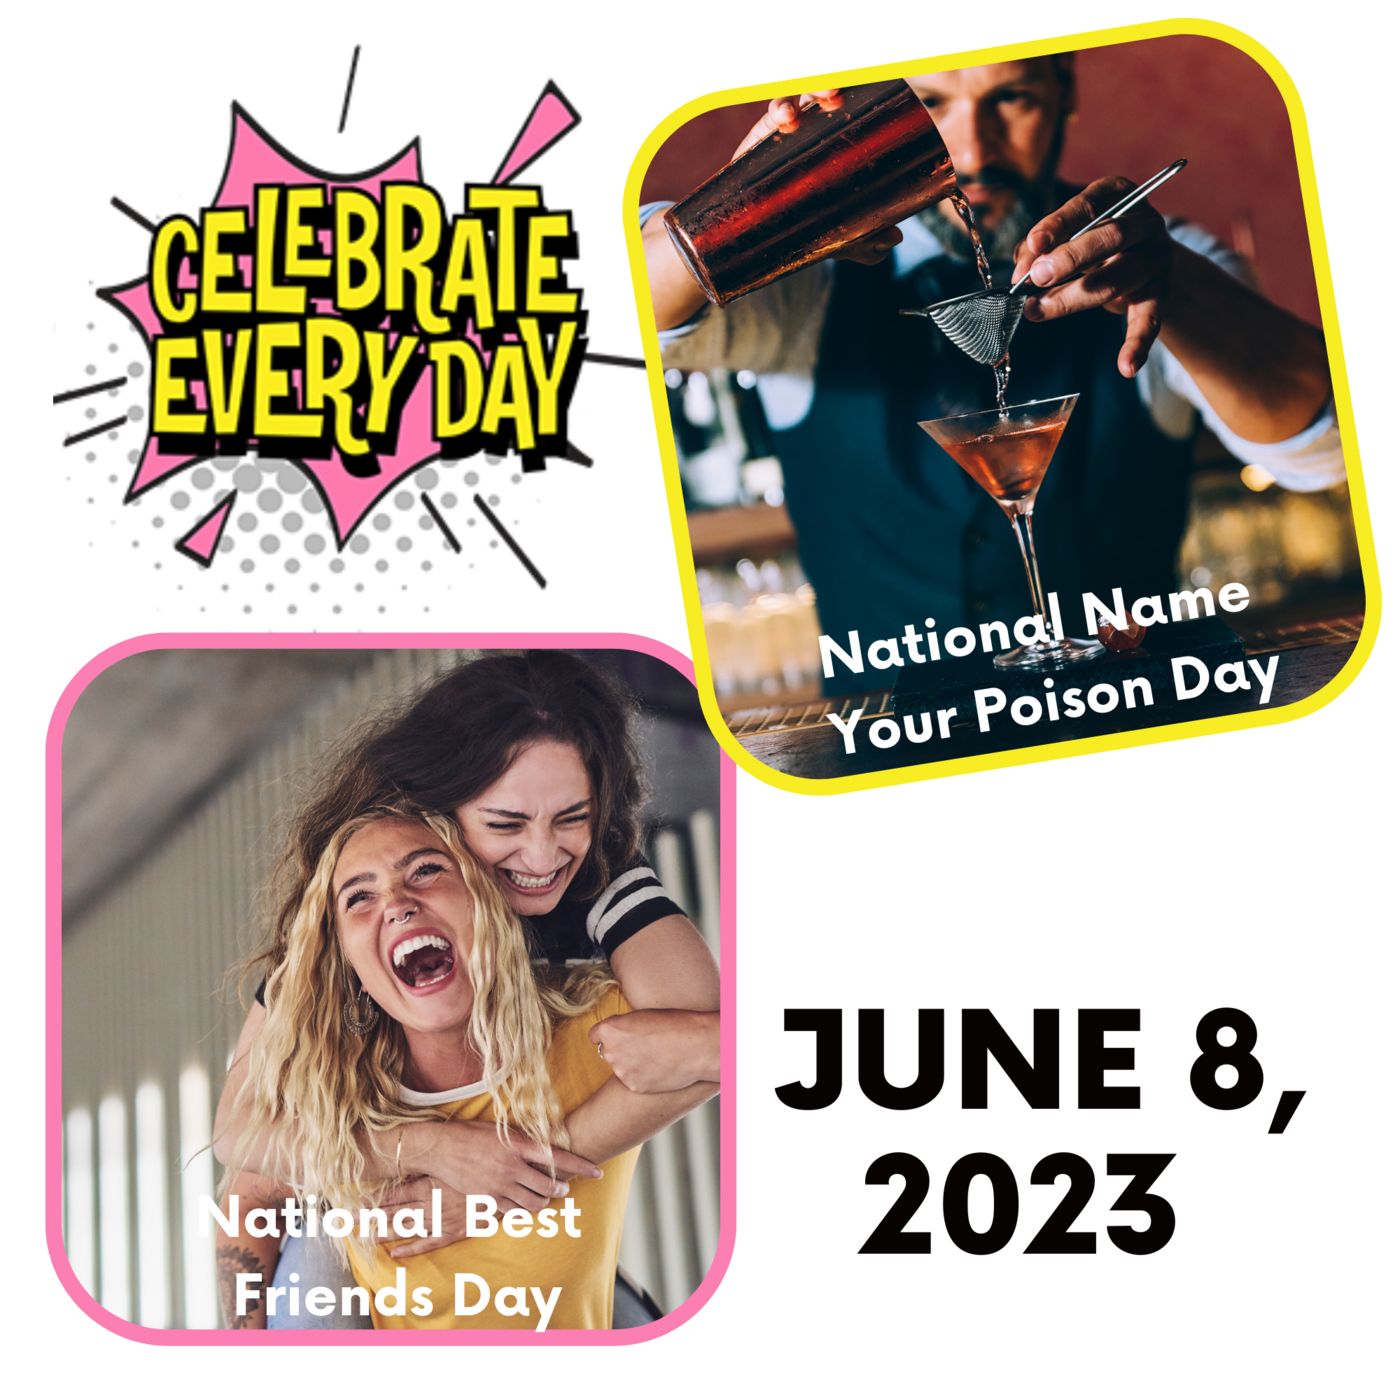 June 8, 2023 - National Best Friends Day | National Name Your Poison Day Image